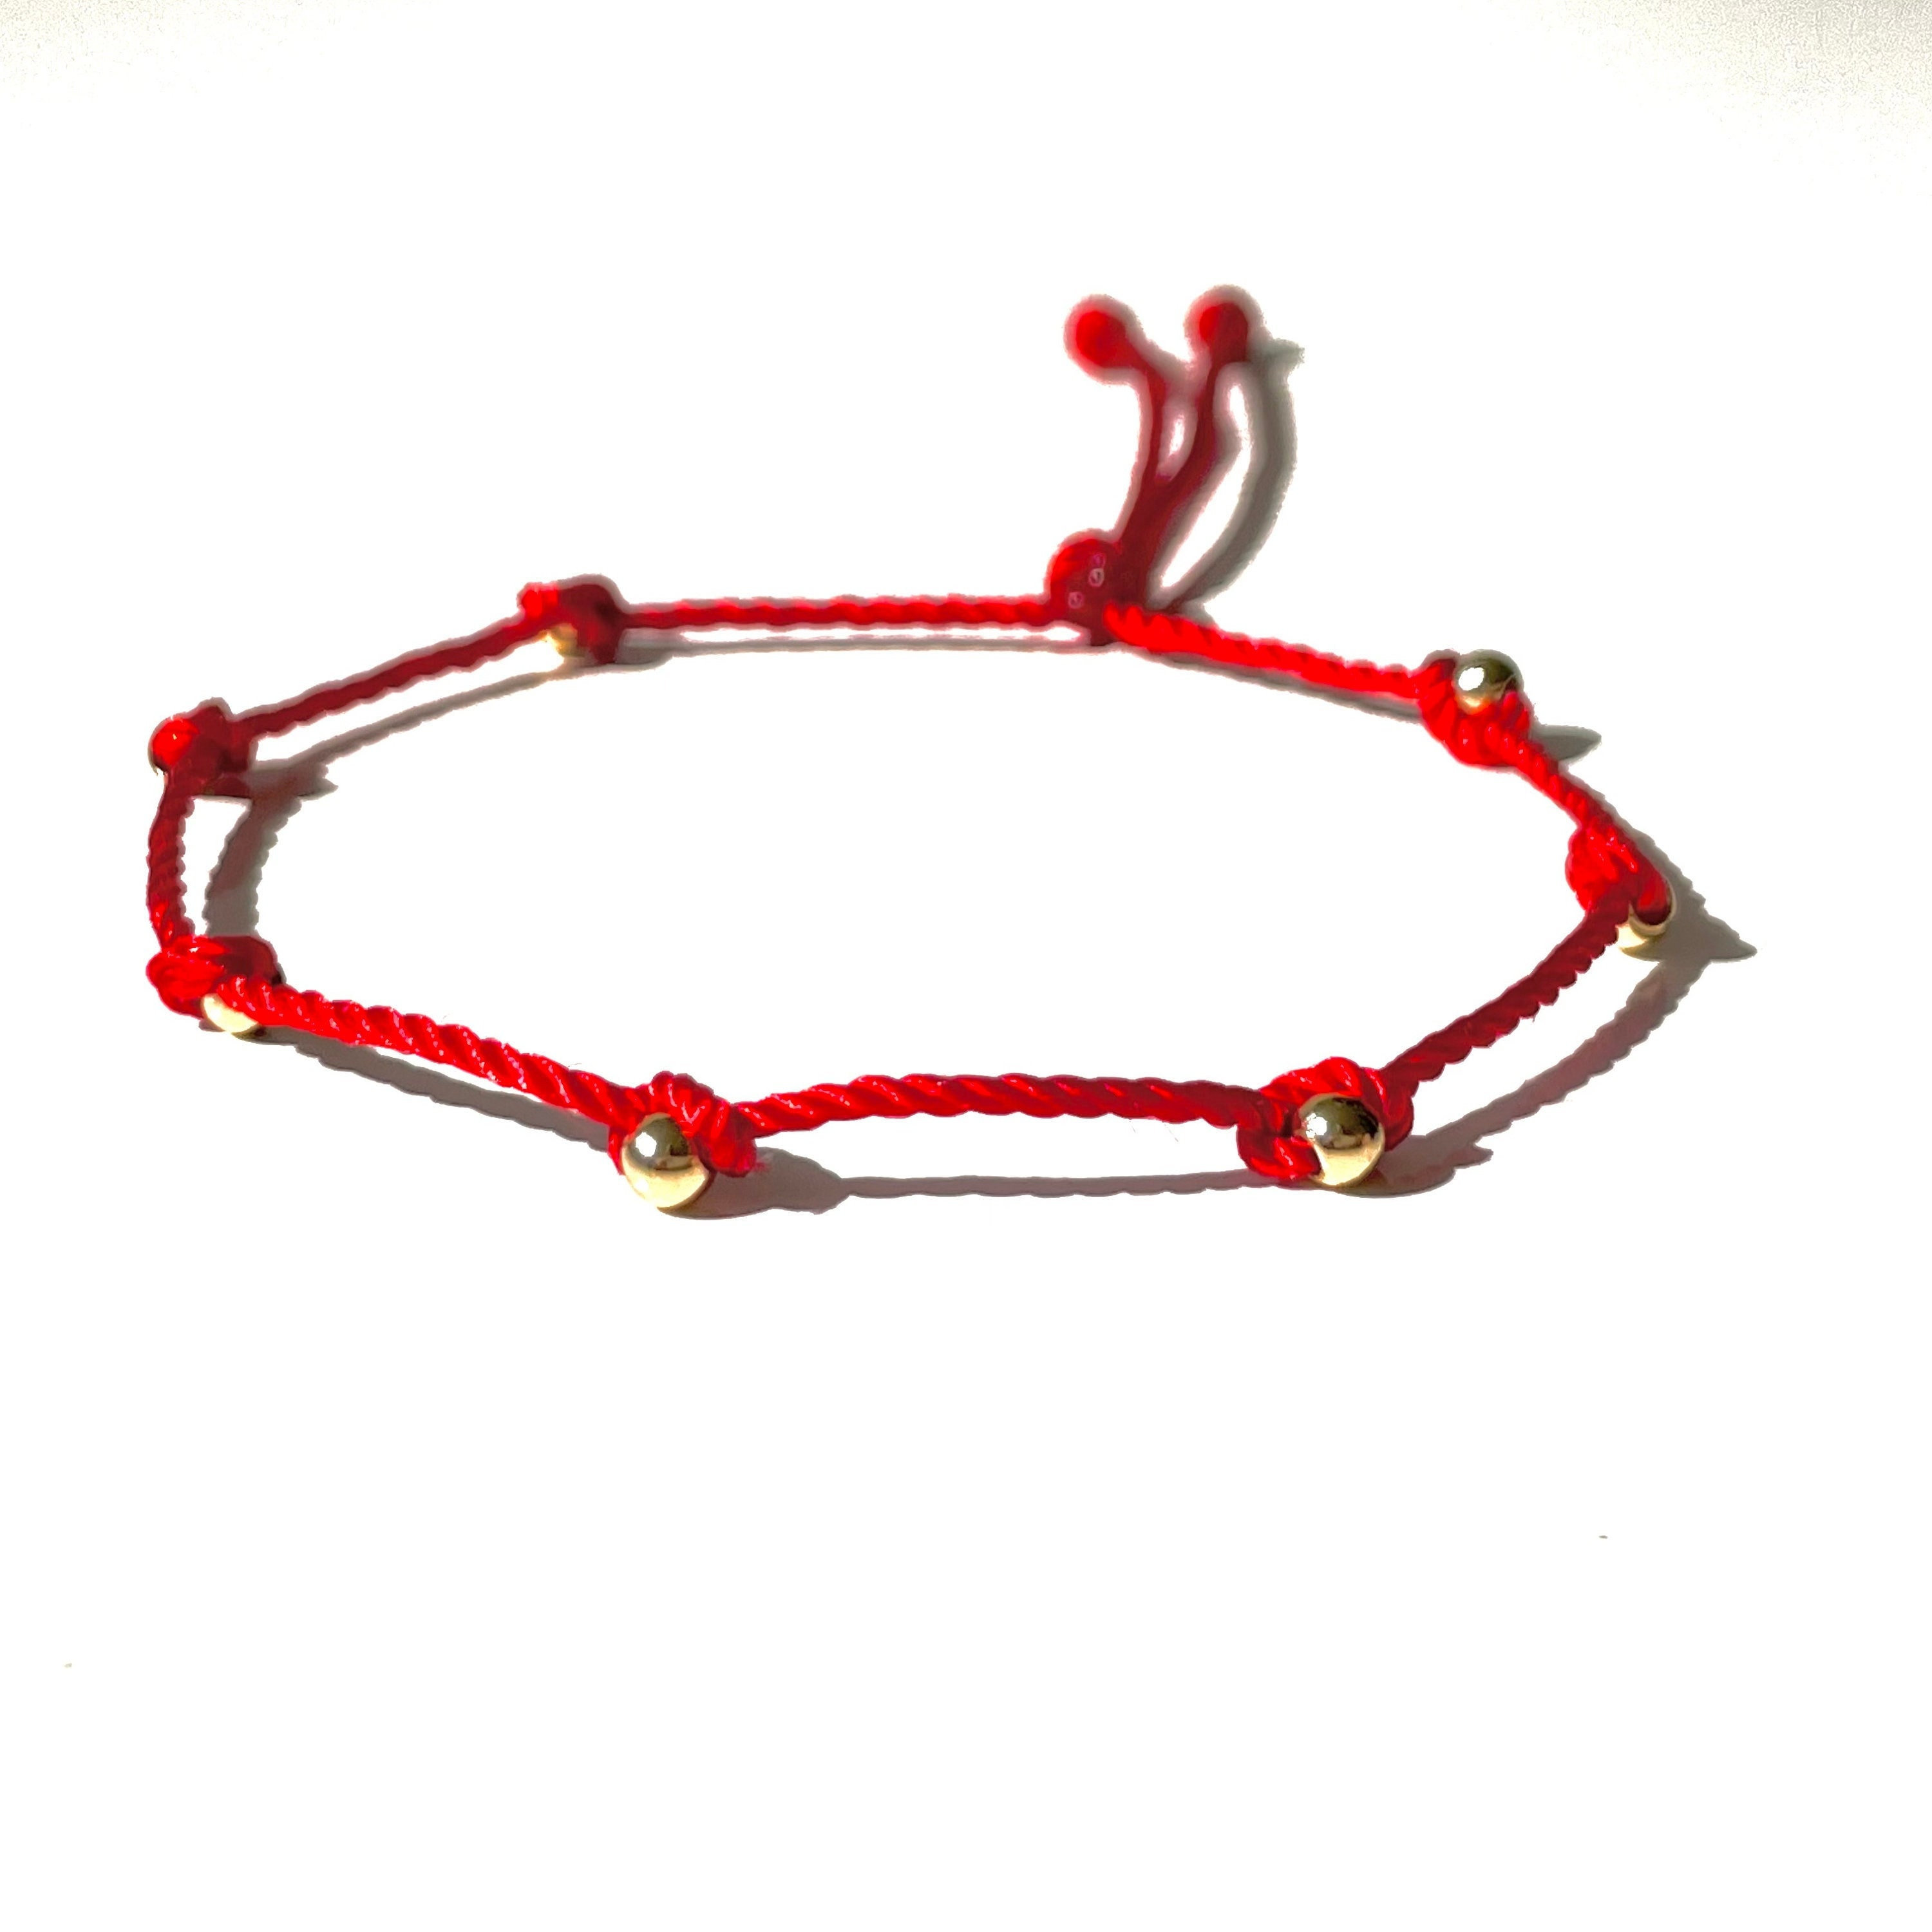 7 Knots Red String Bracelet With 14k Gold Beads Handmade 